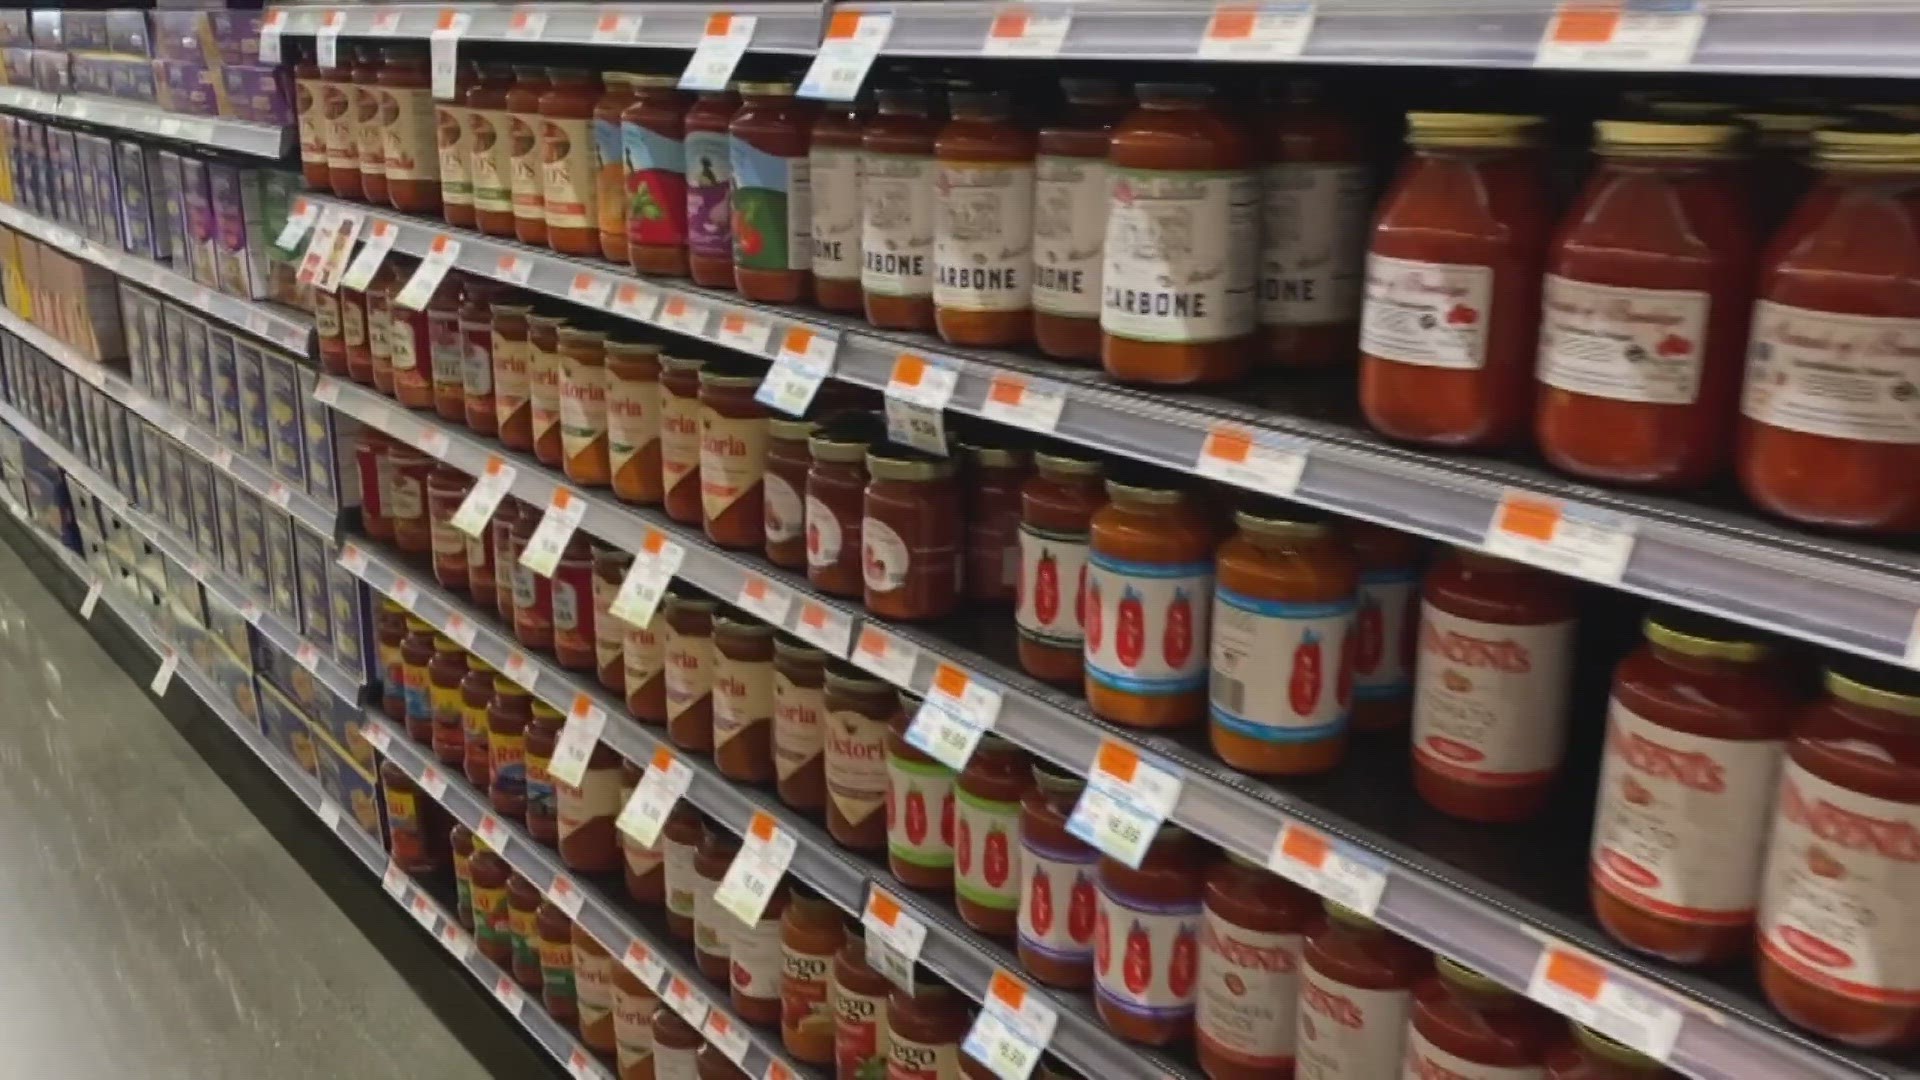 Not everyone has the time to make pasta sauce from scratch. Consumer Reports tested a variety of store-bought pasta sauces to determine the best ones on the shelves.